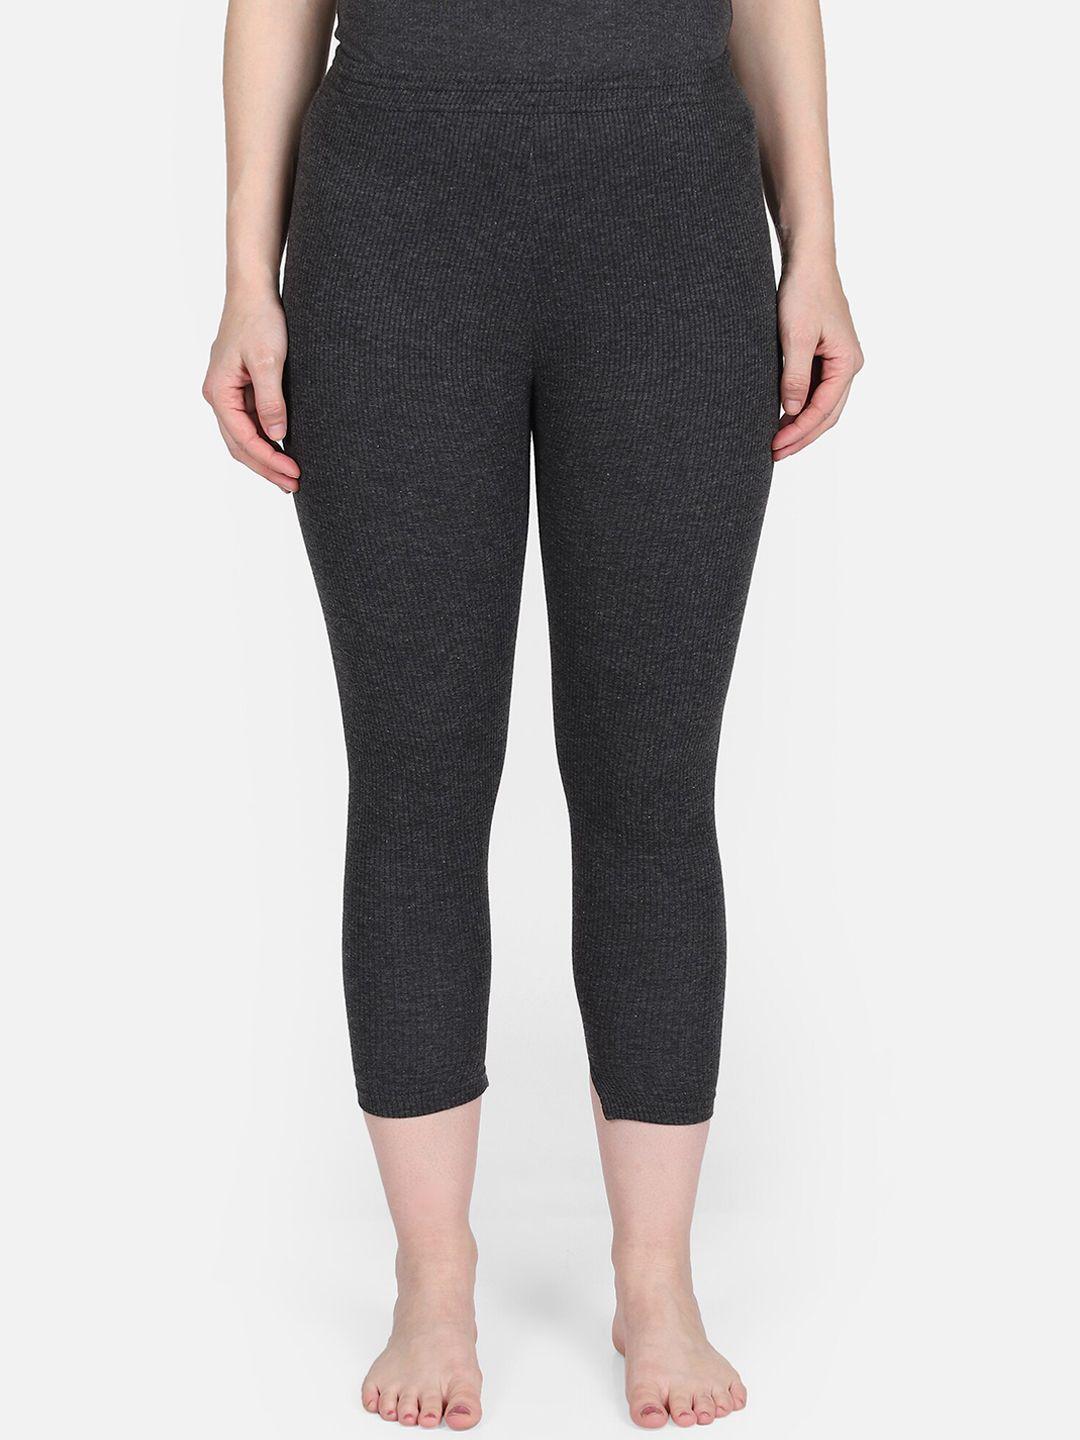 bodycare insider women charcoal-grey solid thermal bottoms